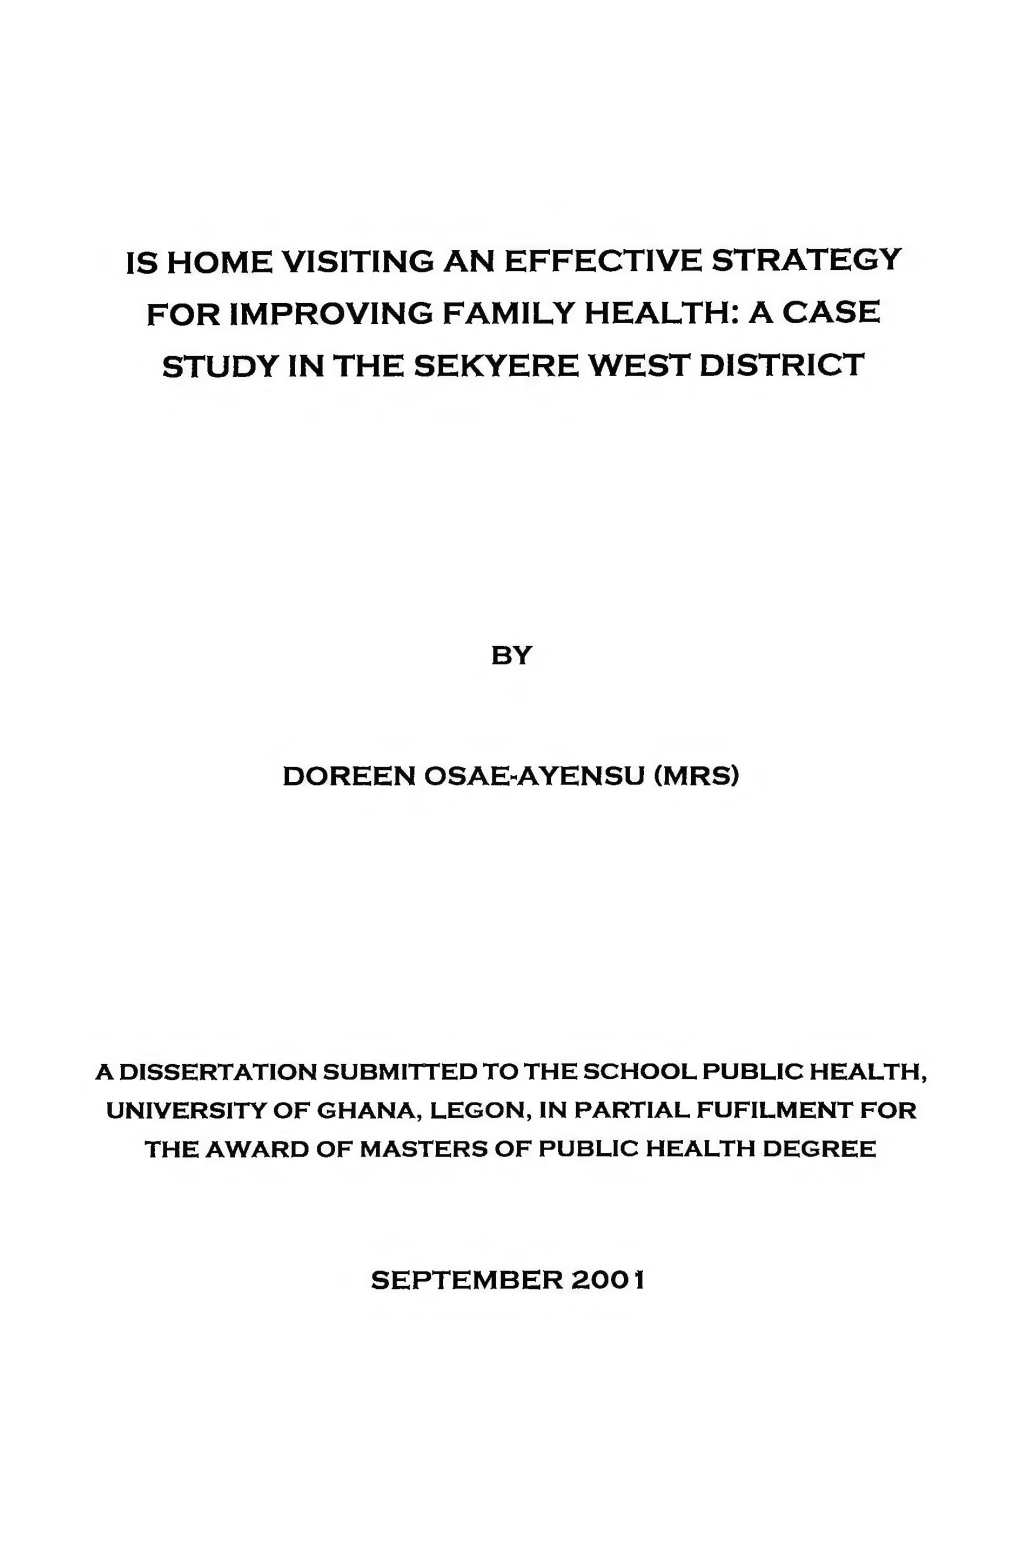 Is Home Visiting an Effective Strategy for Improving Family Health: a Case Study in the Sekyere West District